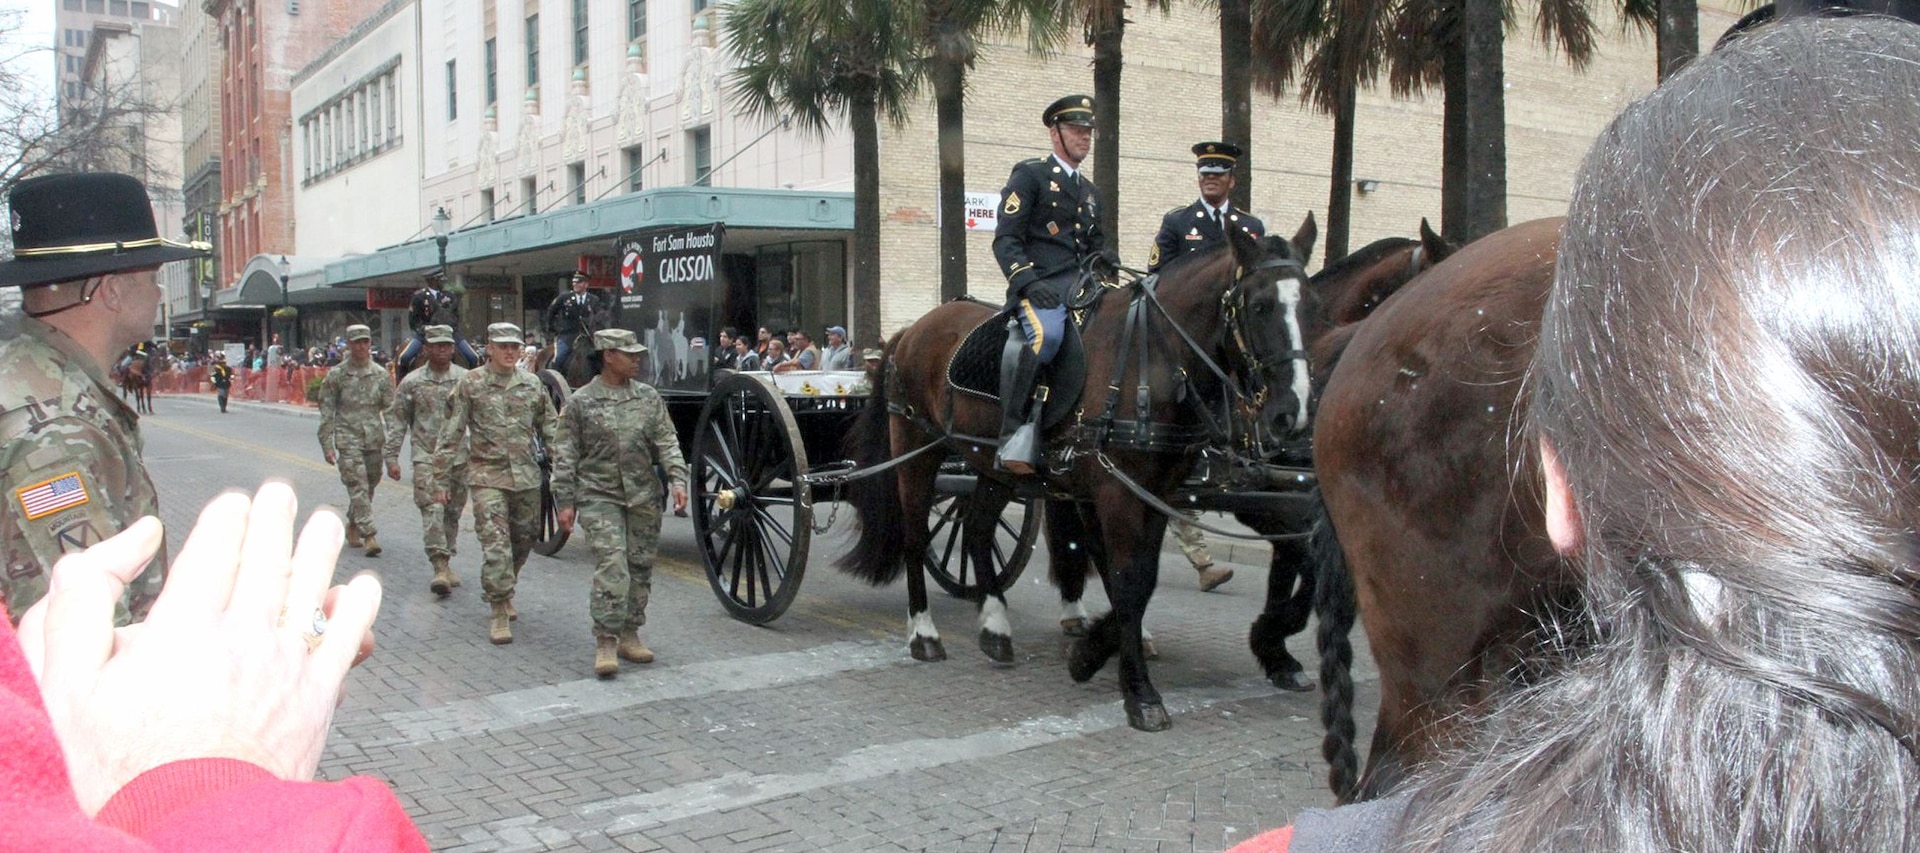 The Fort Sam Houston Caisson Section was just one of three military equestrian units in the parade, joining the Fort Hood-based 1st Cavalry Division Horse Detachment and the U.S. Marine Corps Mounted Color Guard.